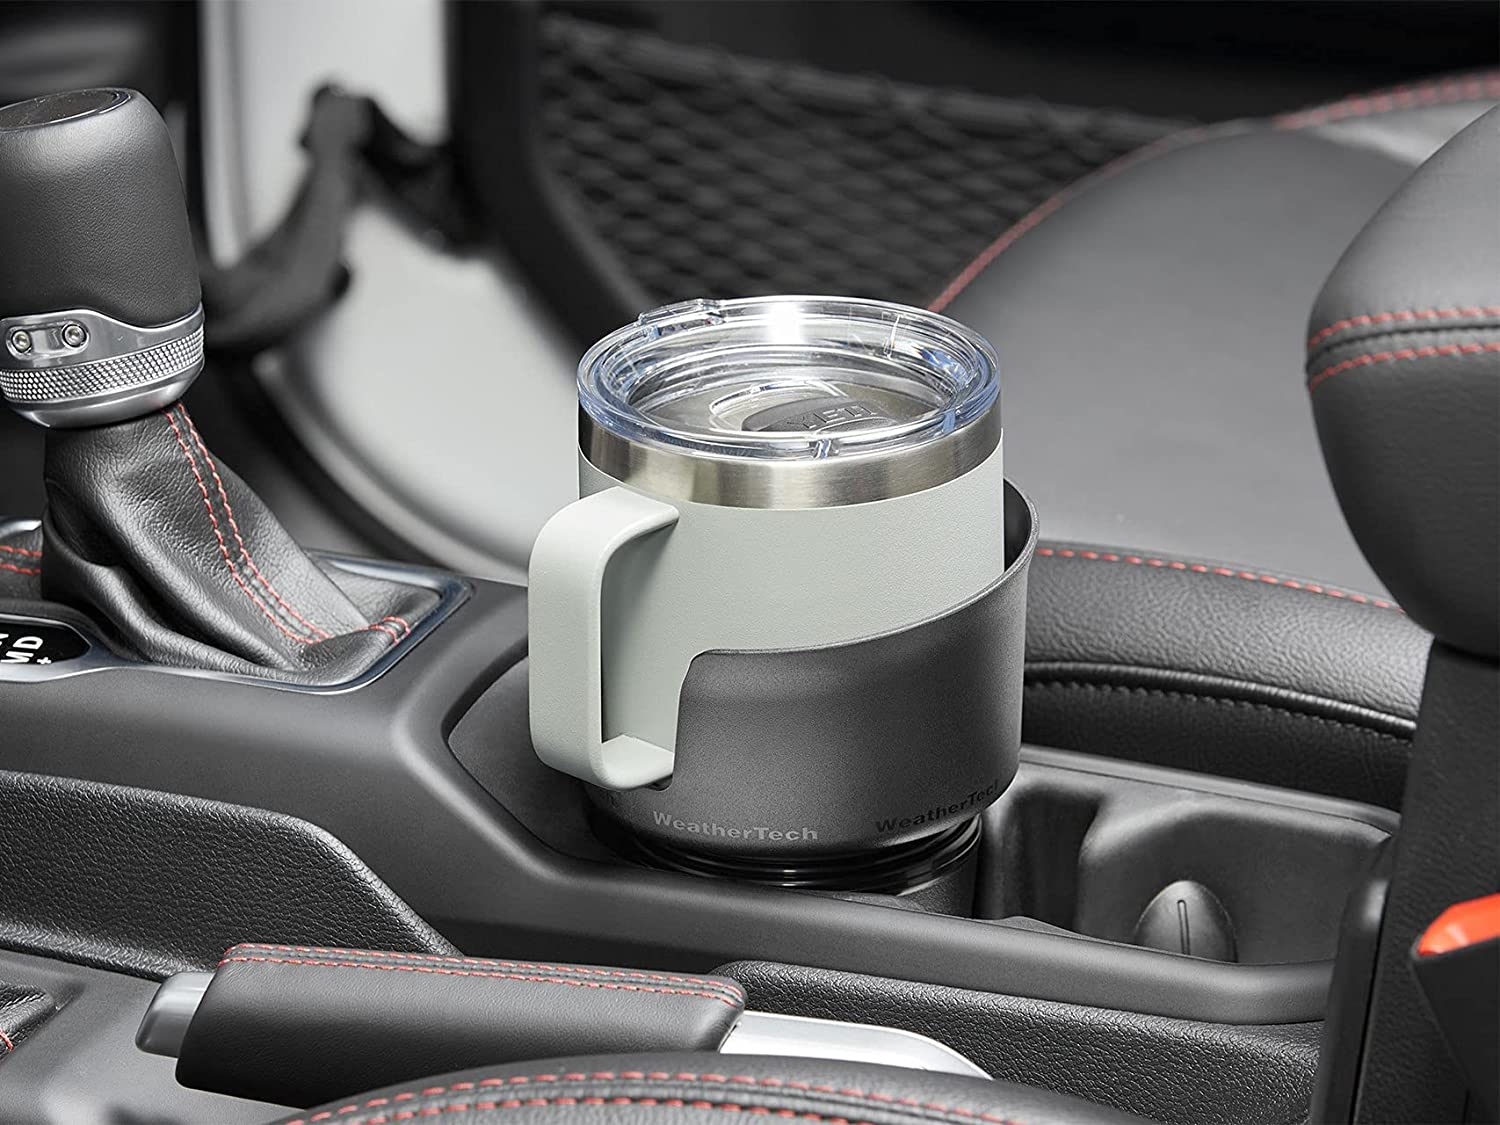 Amazon stocking stuffers for people who love cars coffee cup holder.jpg